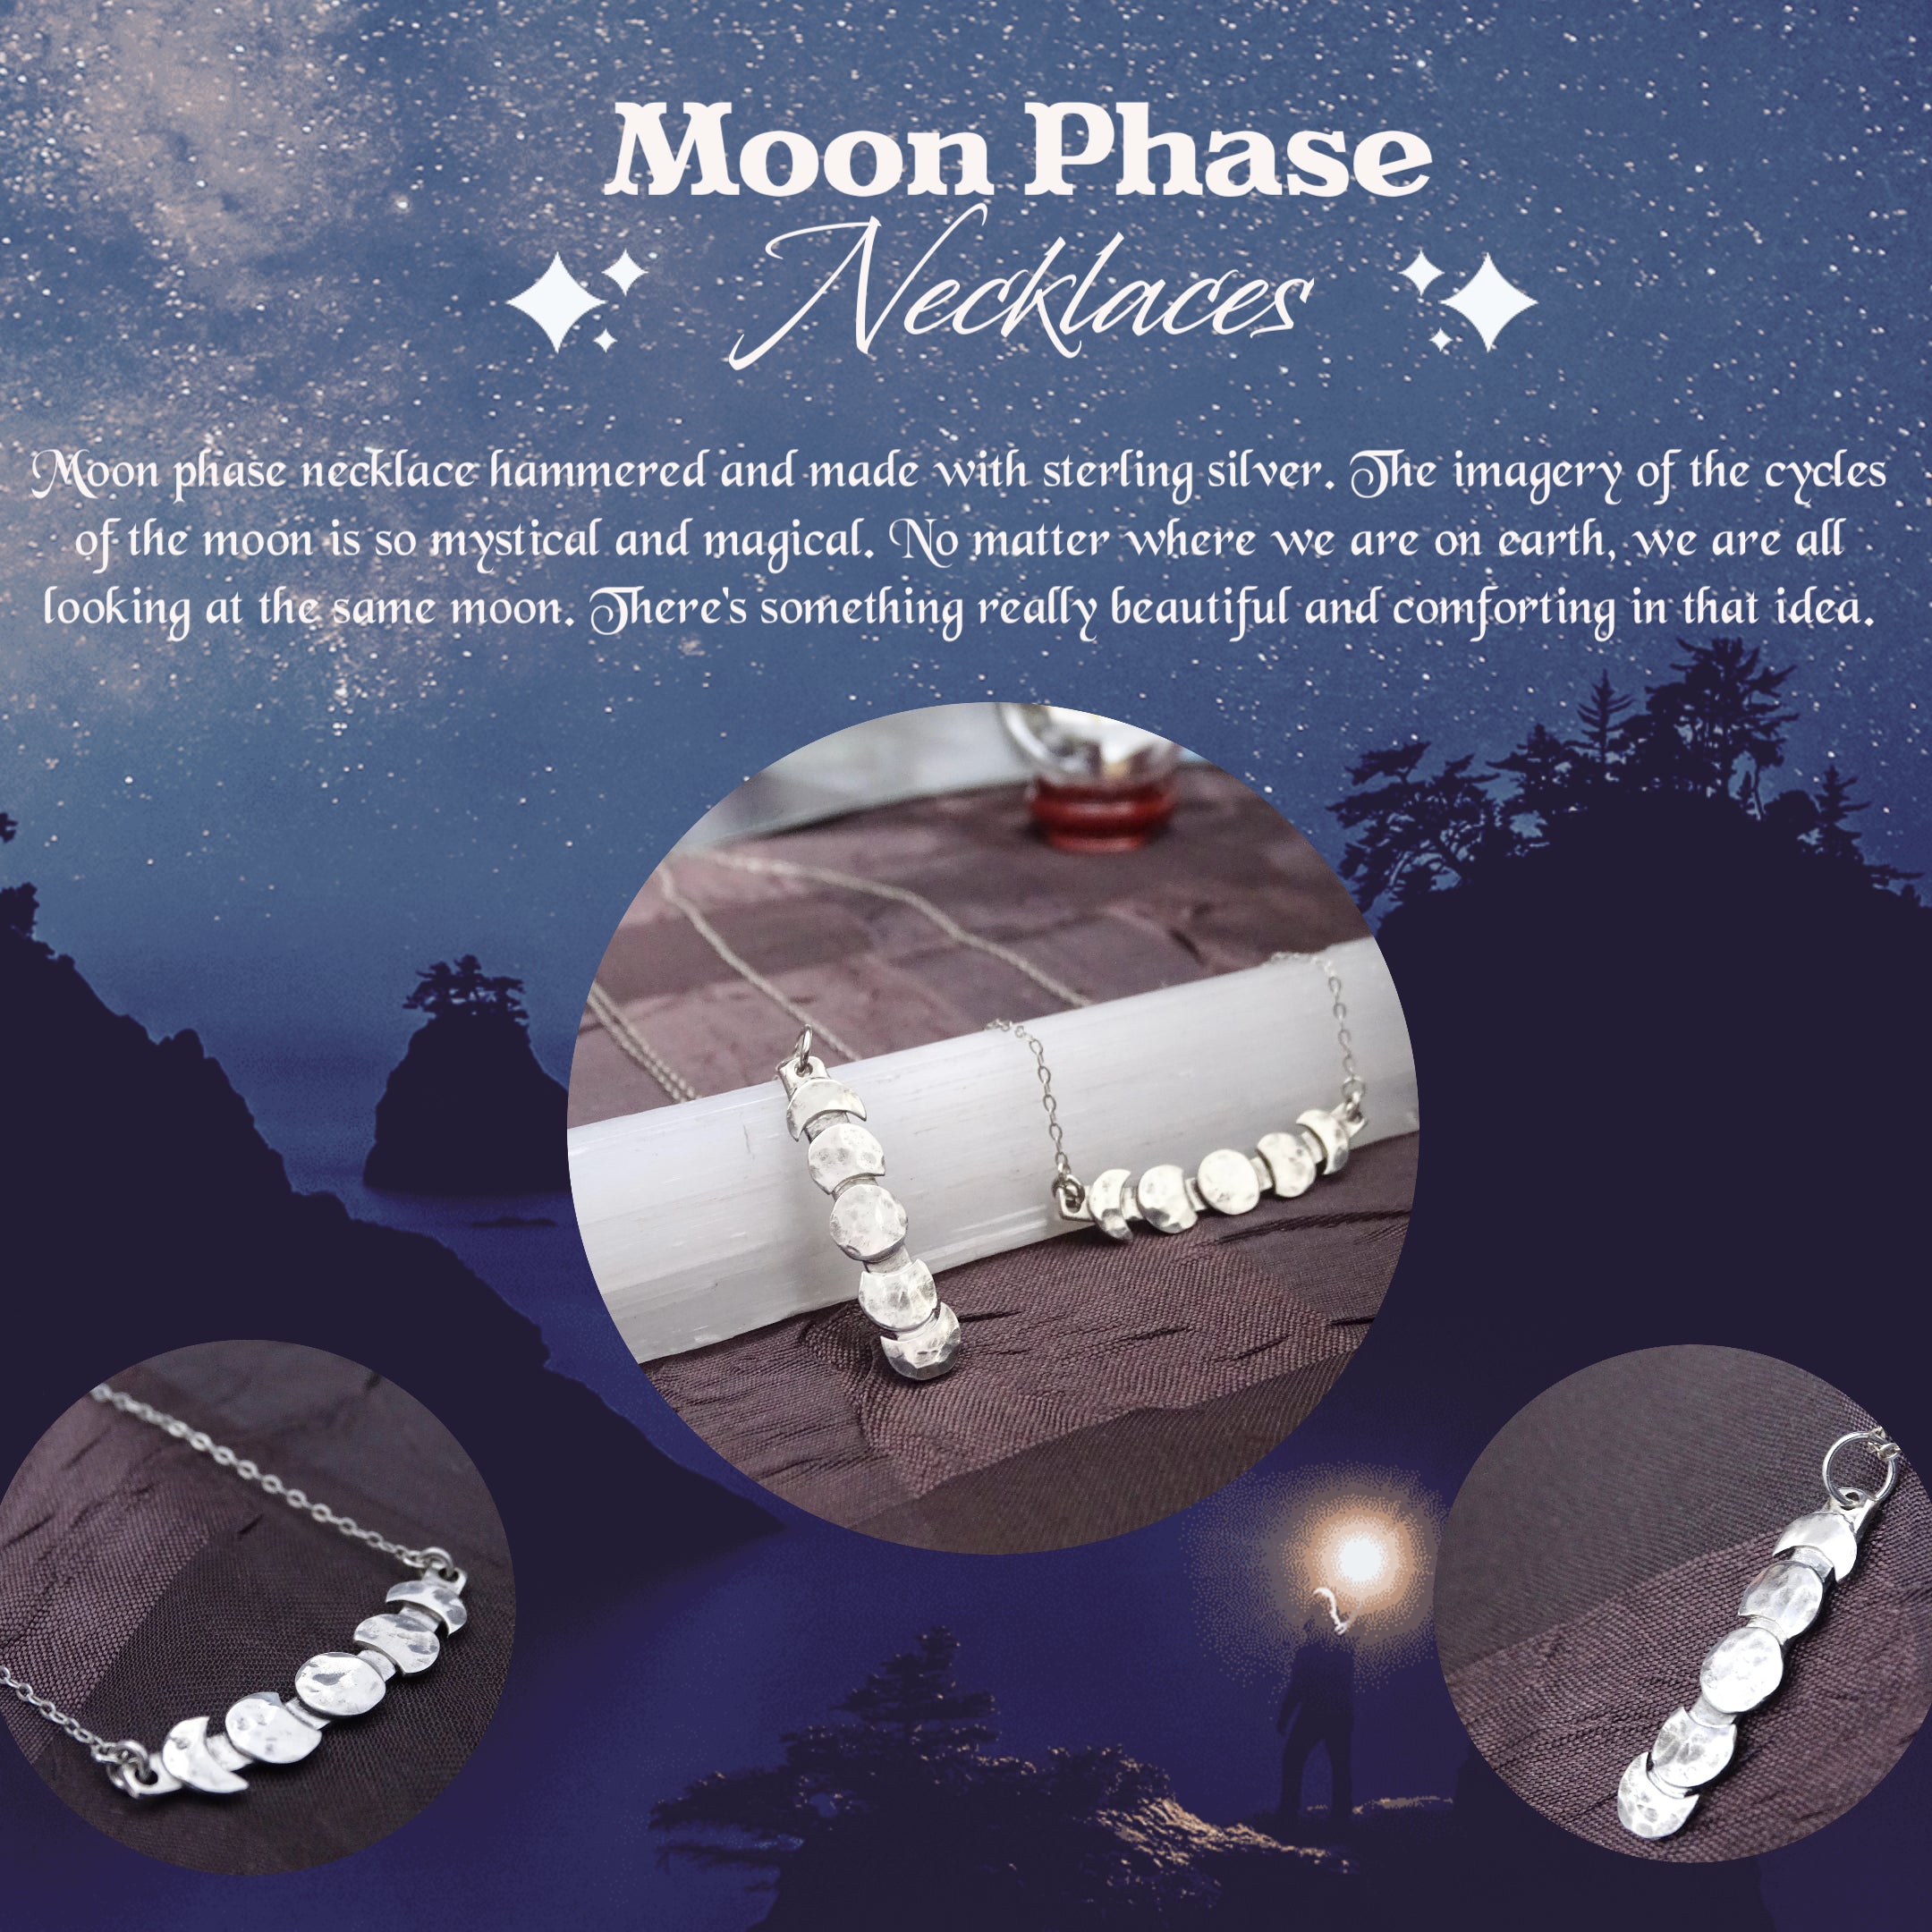 Load video:  The Silver Wing  - Sterling Silver Jewelry - Moon Phase Necklace